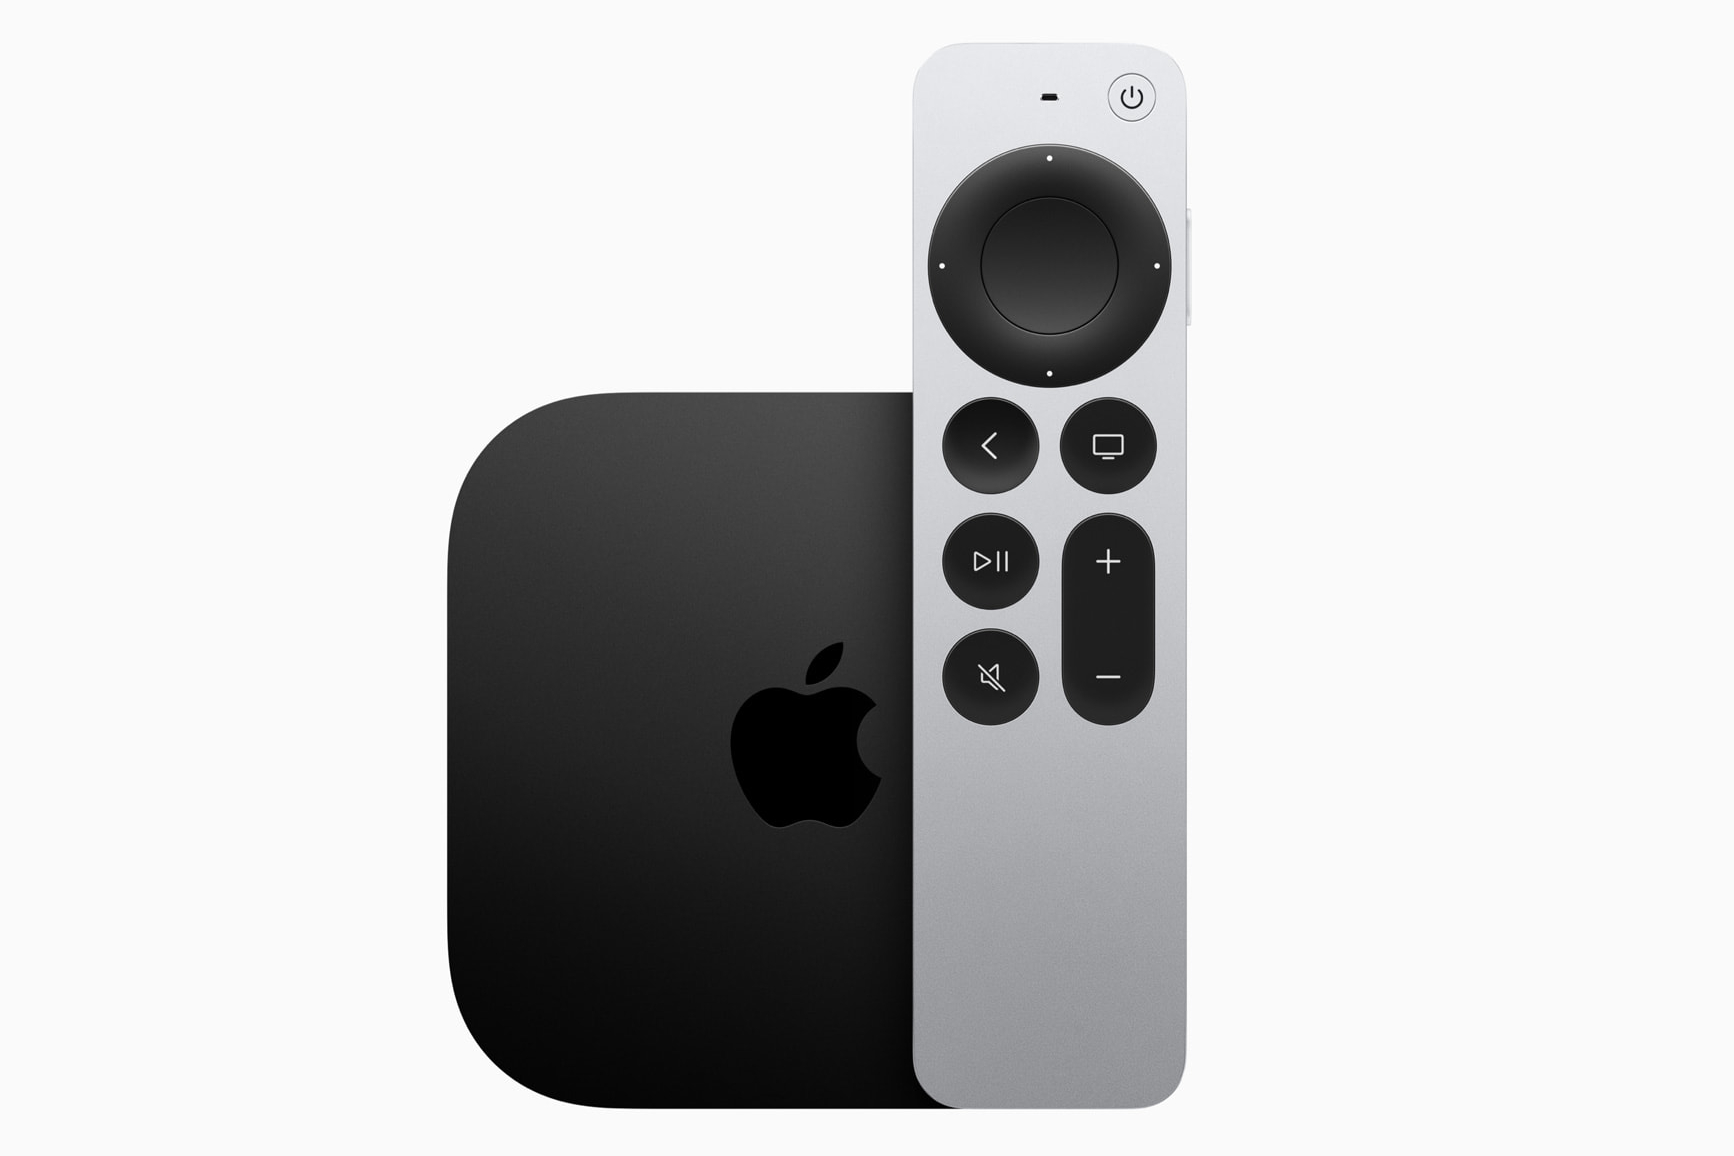 ækvator Isaac Dokument How to pair an Apple TV remote with an Apple TV | Digital Trends